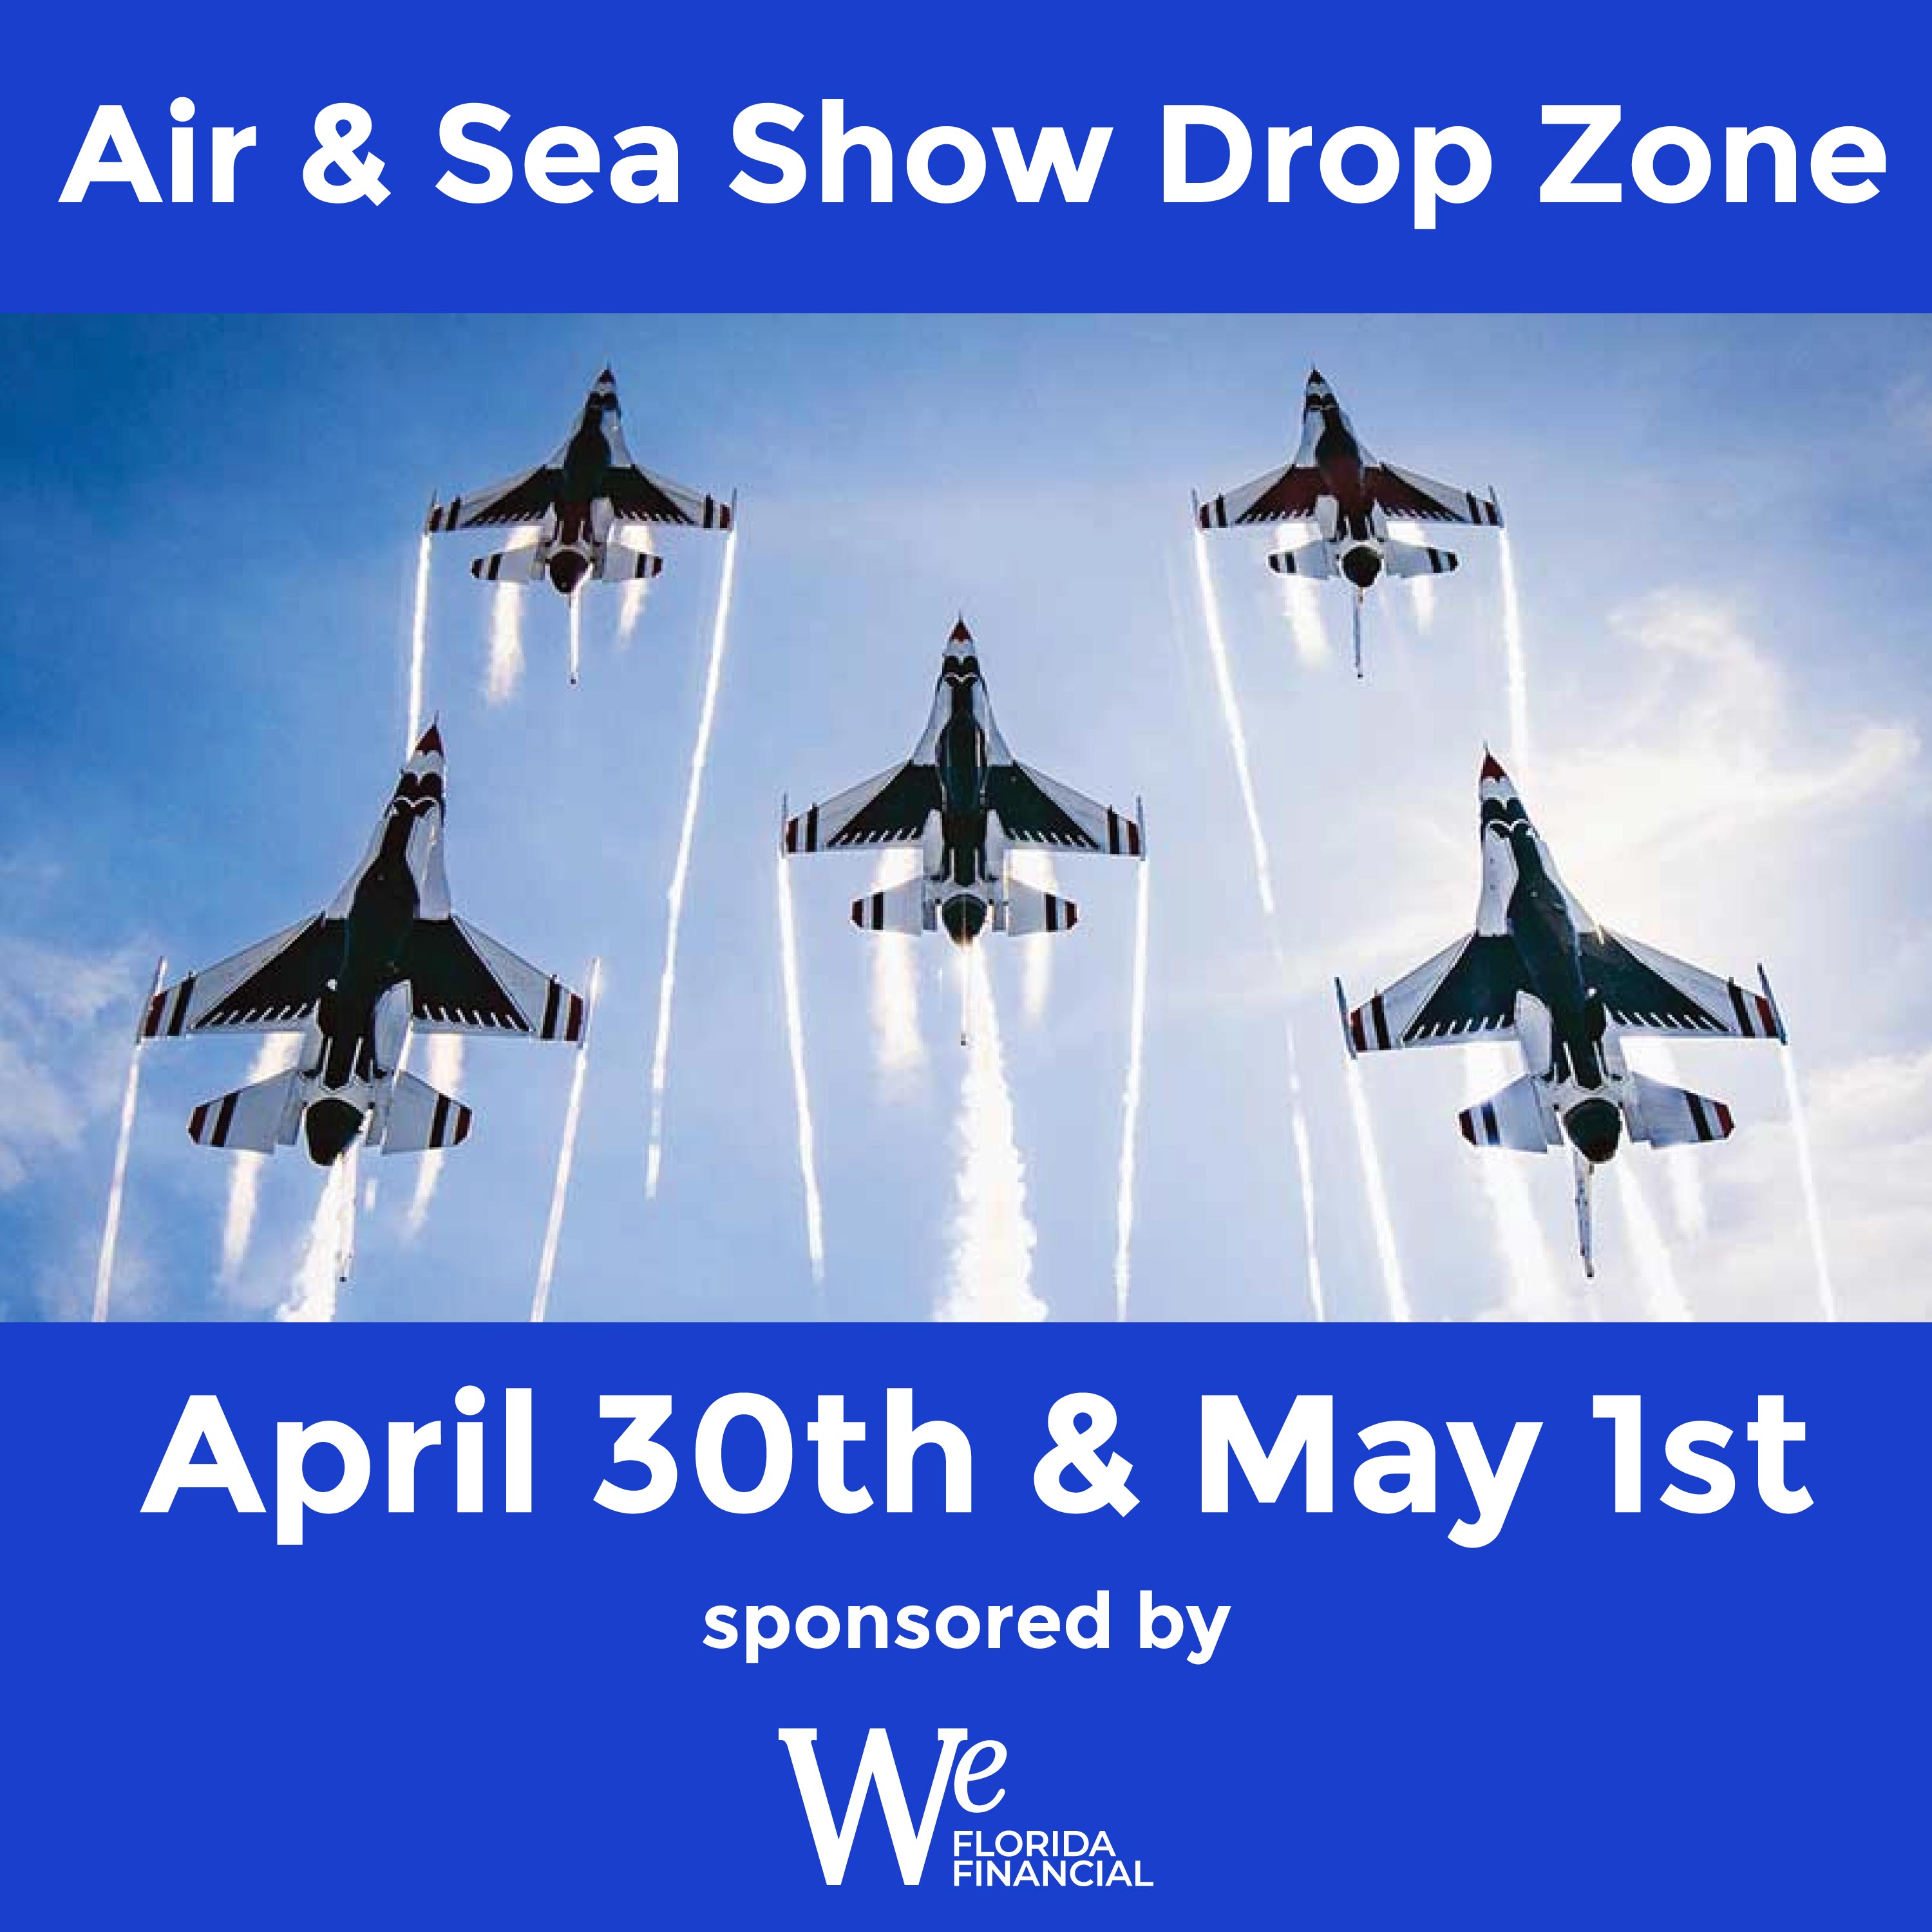 Air and sea show drop zone - April 30th - May 1st sponsored by We Florida Financial